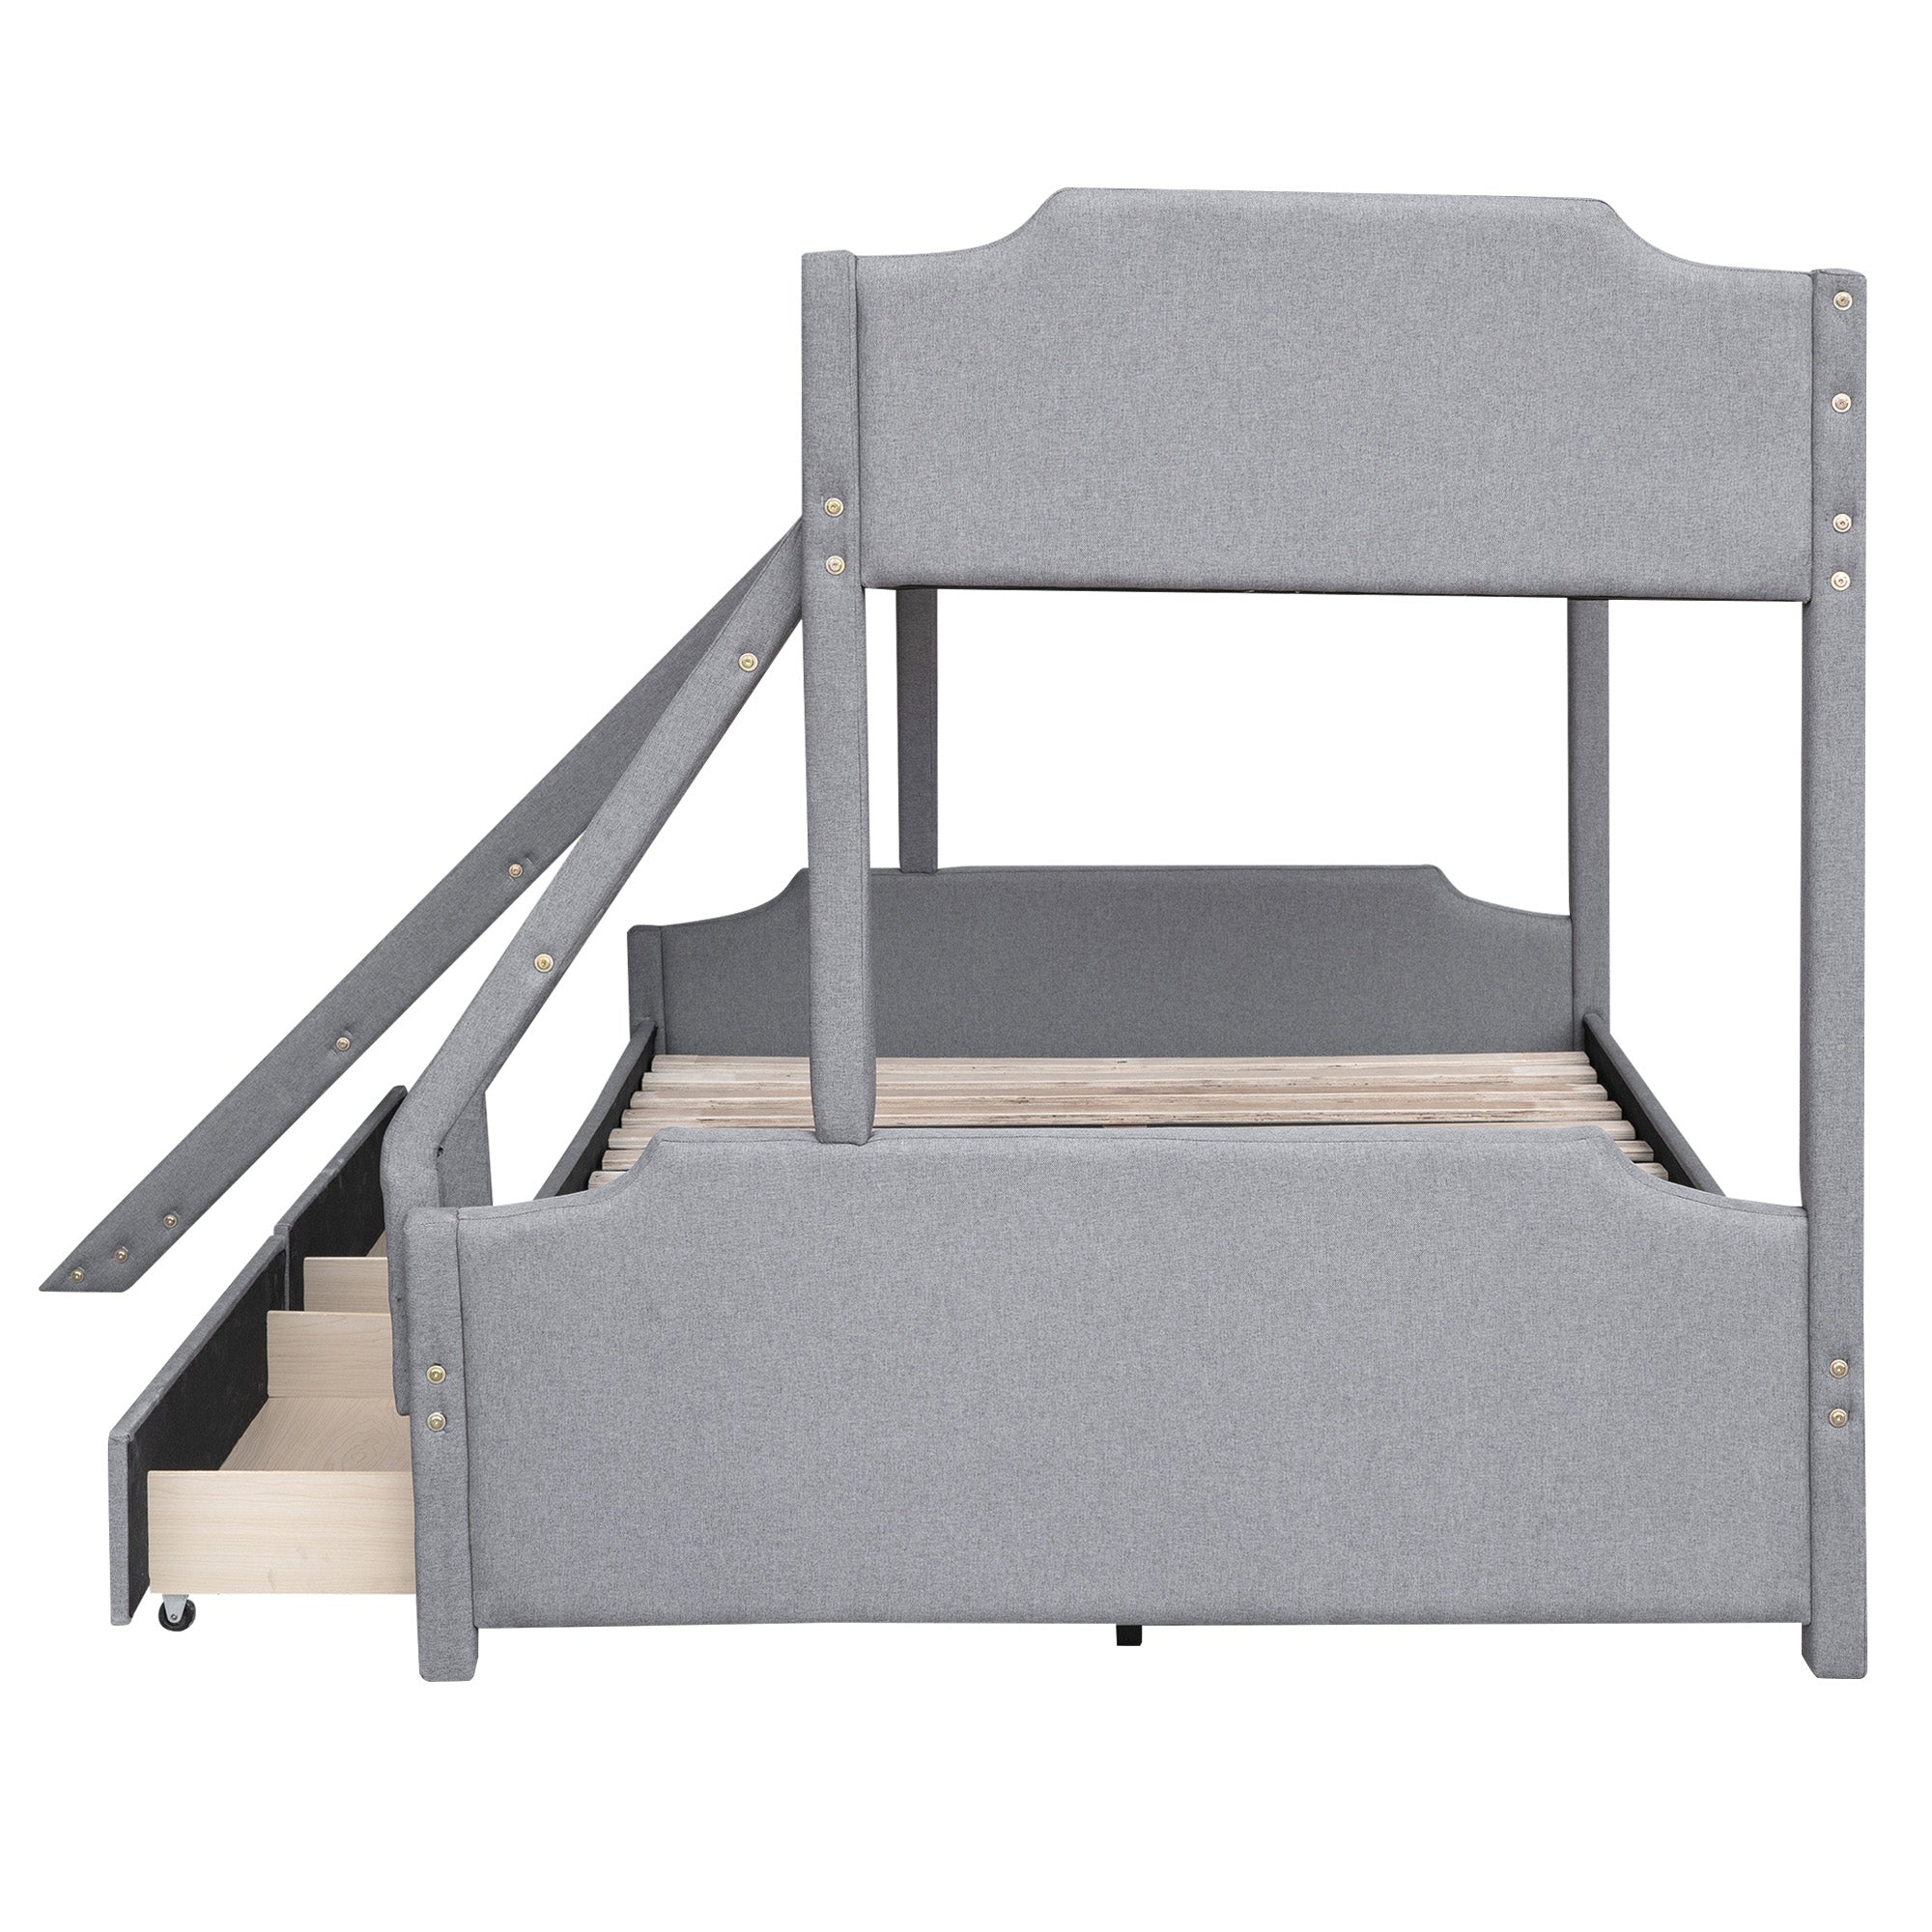 EUROCO Upholstery Twin over Full Bunk Bed with Slide and Drawers for Kids Room, Gray